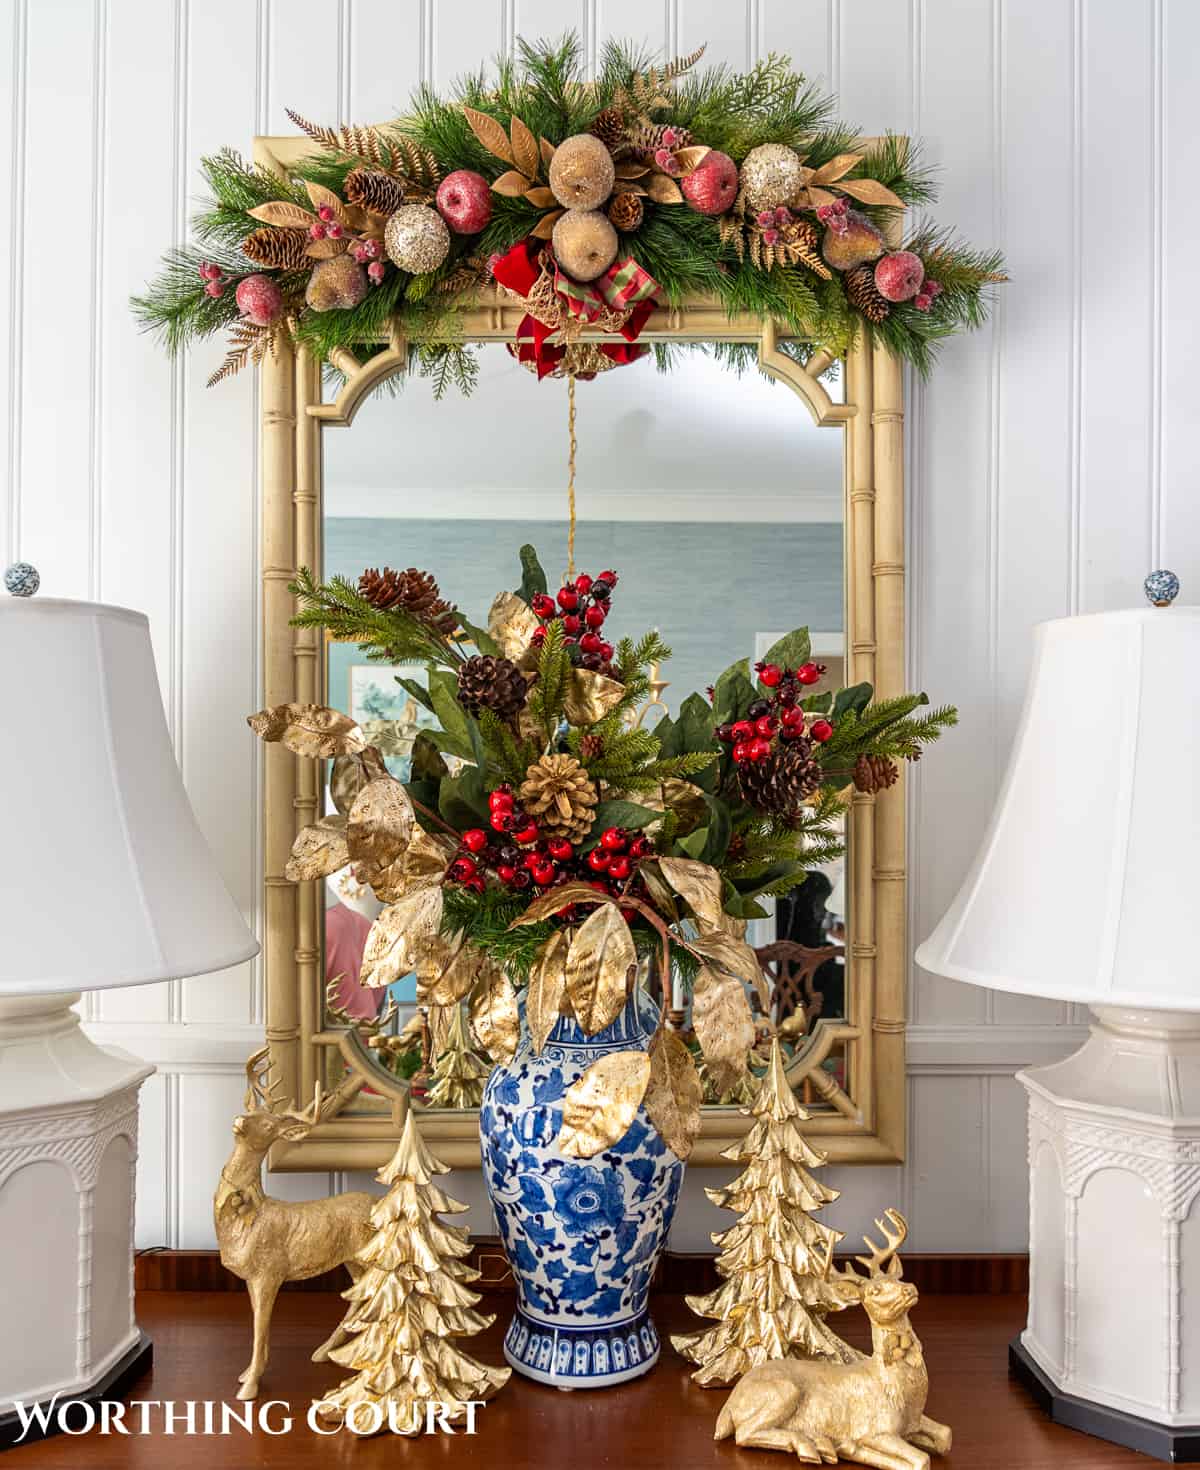 Christmas vignette on a sideboard with burgundy and gold stems in a blue and white vase flanked by gold deer and gold Christmas trees